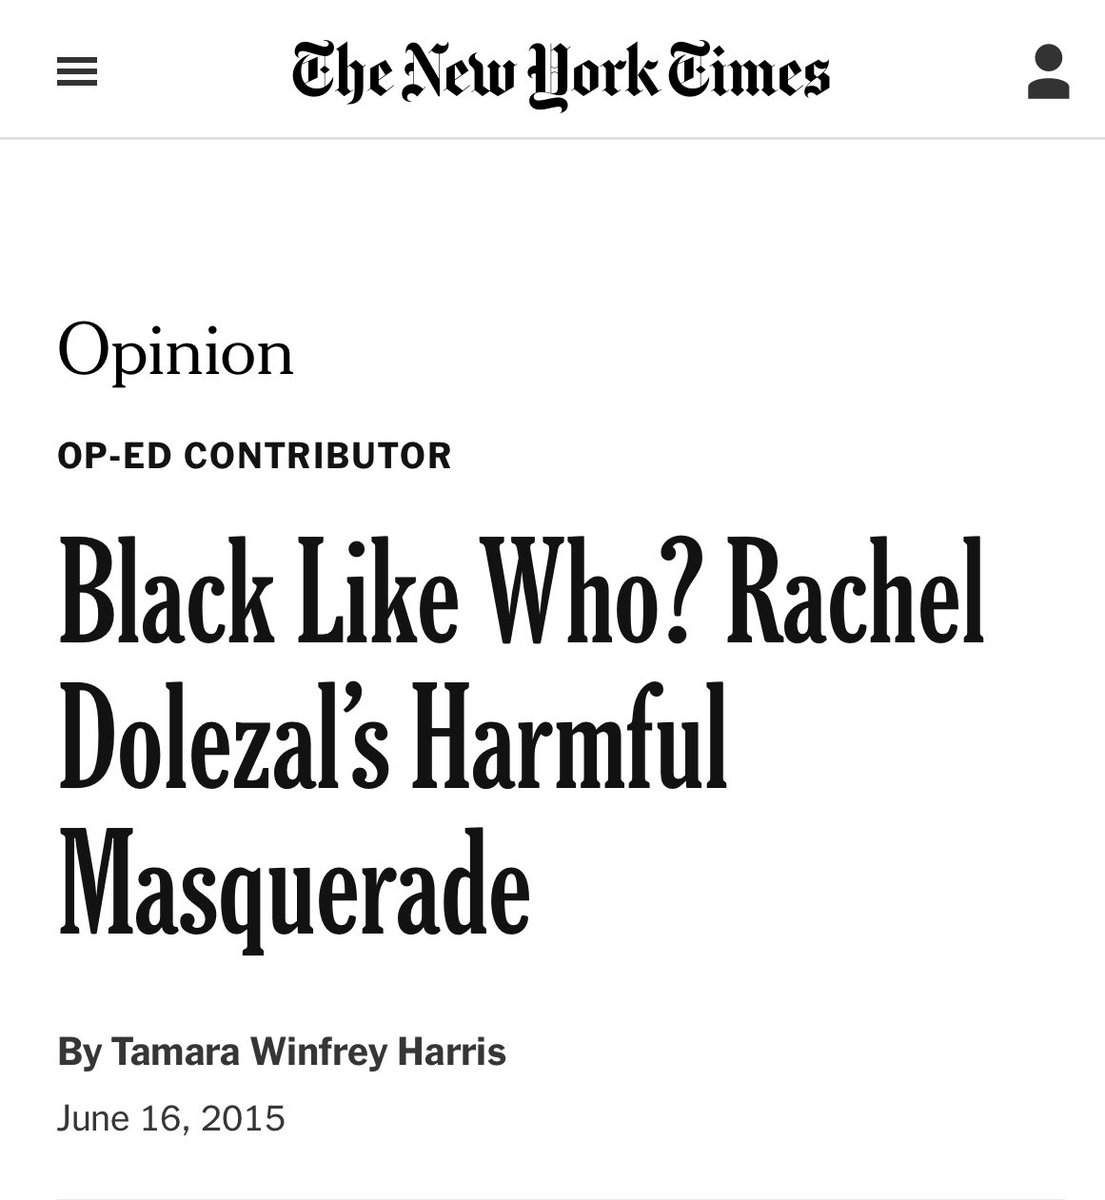 The NYT affirmed a white man who “identified” as a woman in June 2015, but ridiculed a white woman who “identified” as black a few weeks later. What this particular issue reveals is that the rules of progressive identity construction are arbitrary and logically incoherent.